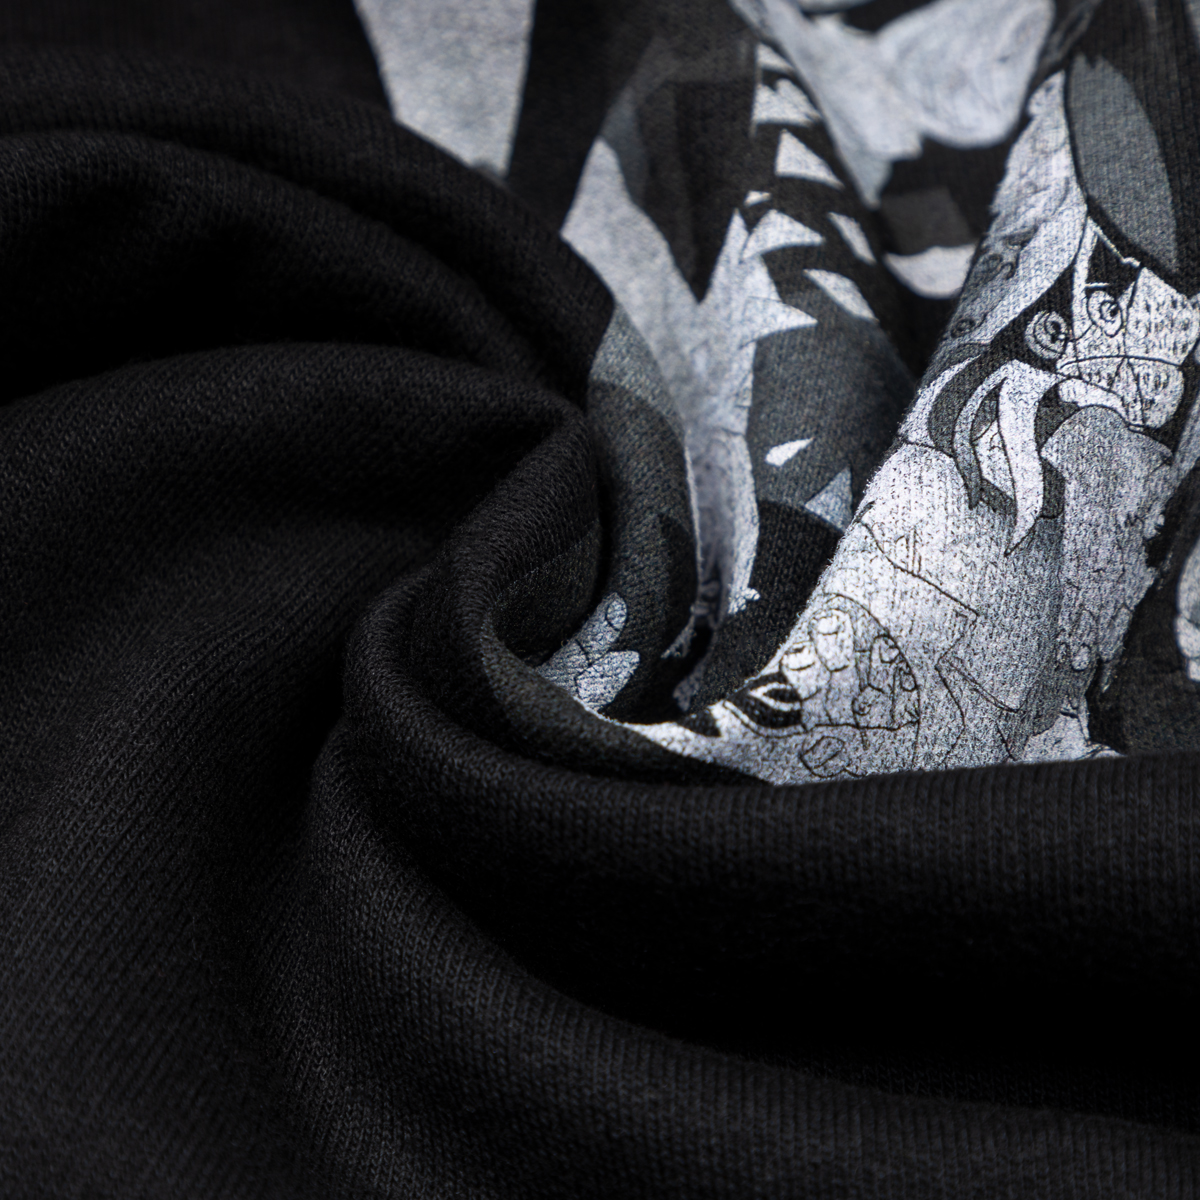 The Witcher Hoodie "Ciri Picasso Art" Image 3